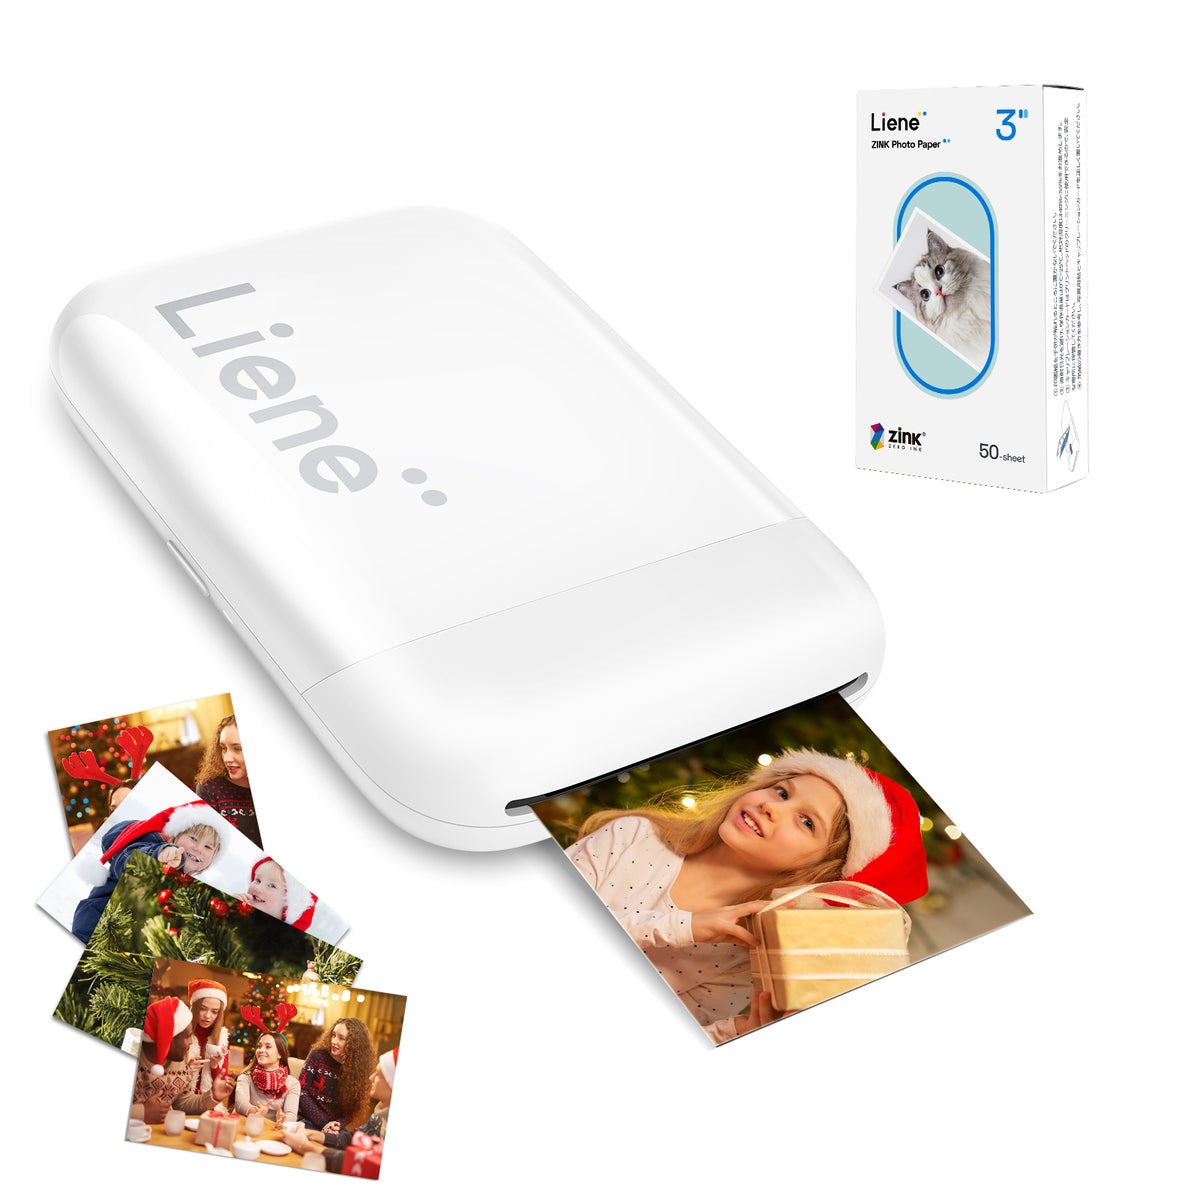 Unleash Your Creativity On the Go with Pearl Portable Photo Printers